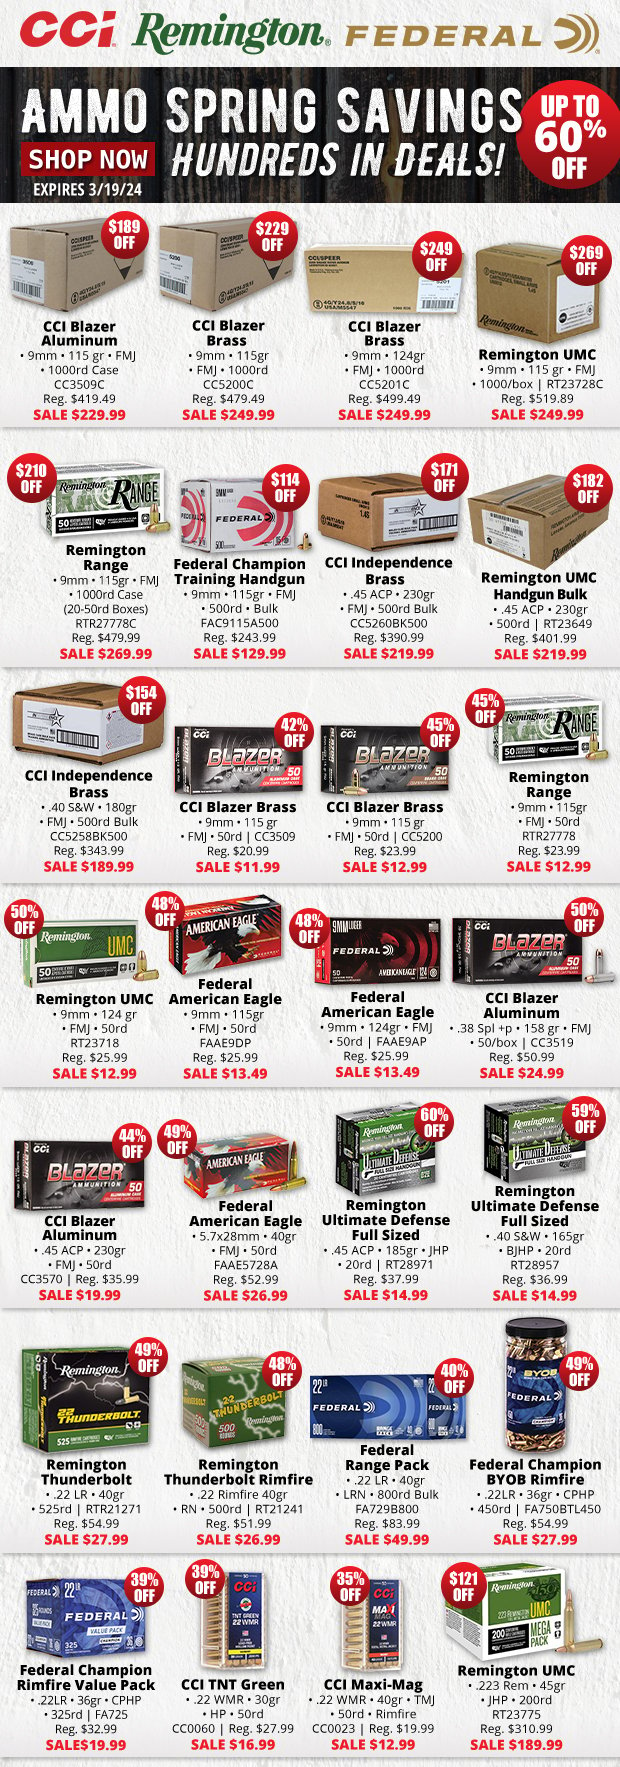 Up to 60% Off with Ammo Spring Savings!